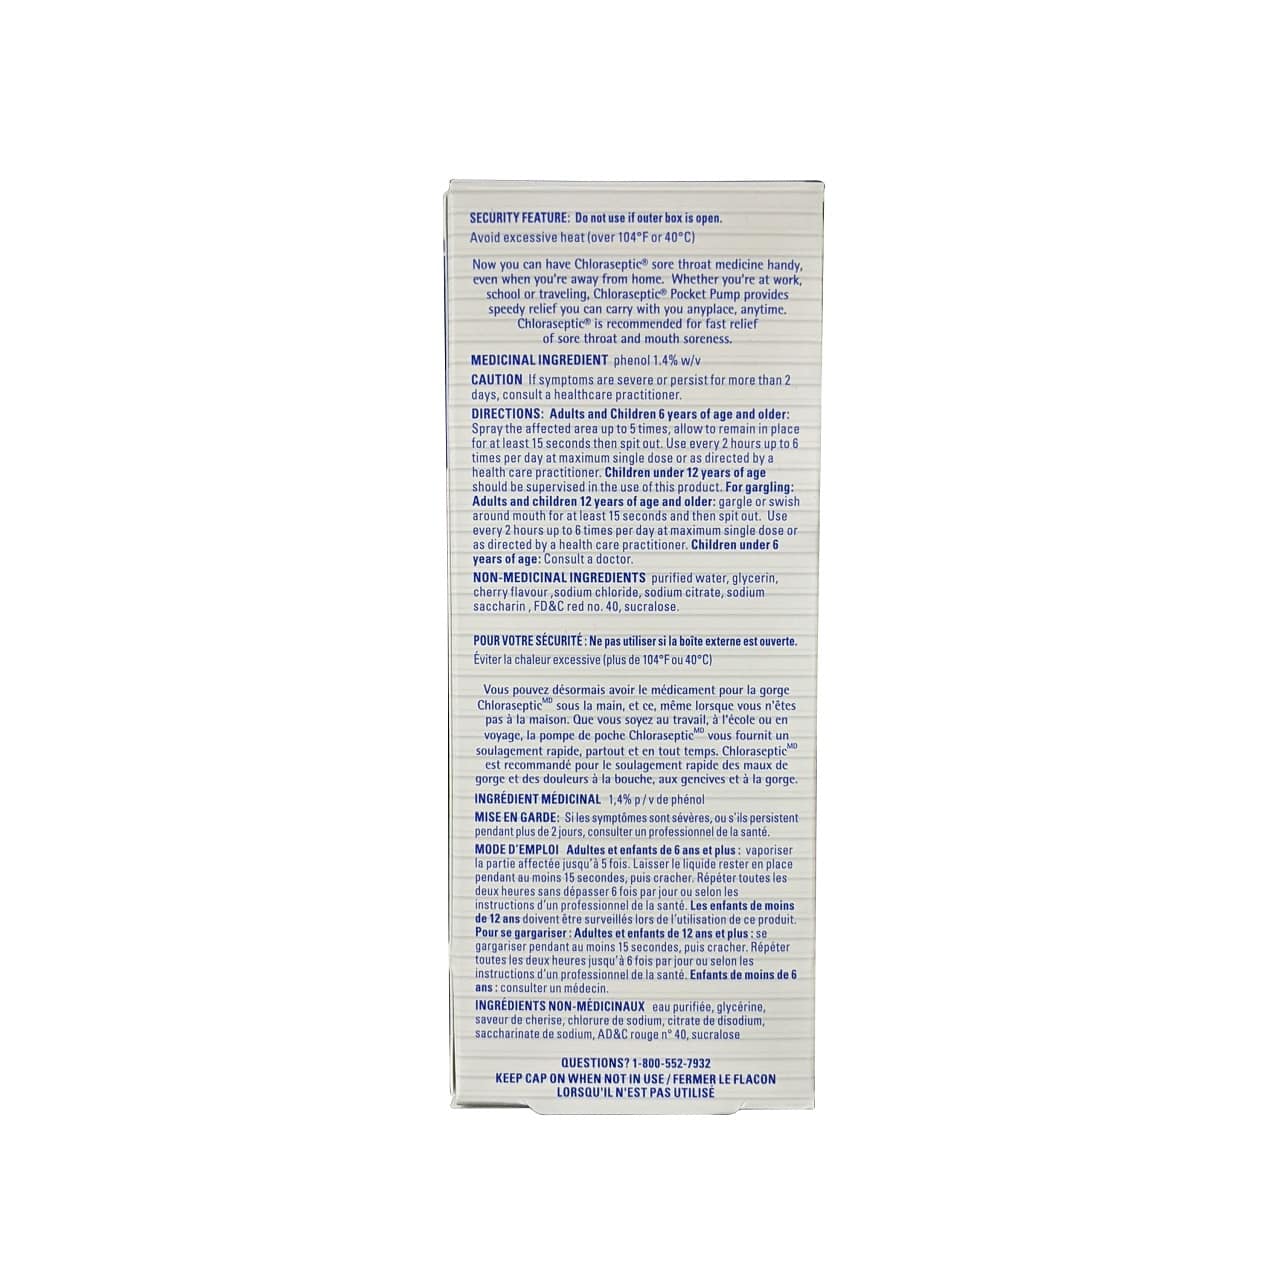 Ingredients, cautions, directions for Chloraseptic Pocket Pump Sore Throat Spray Cherry Flavour (25 mL)